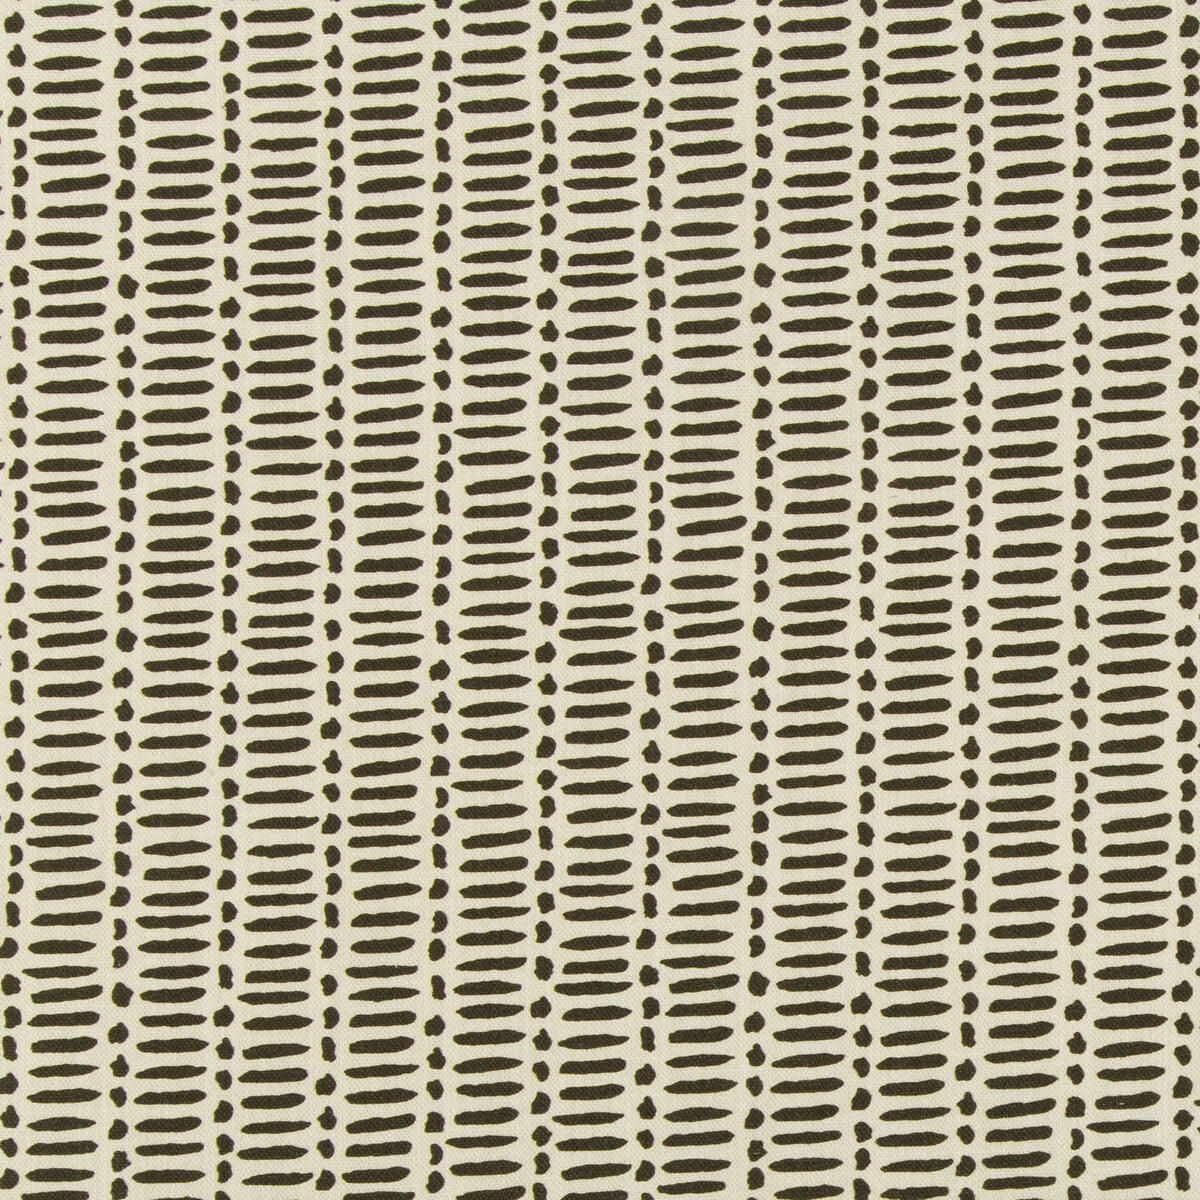 Dash Off fabric in espresso color - pattern DASH OFF.106.0 - by Kravet Basics in the Nate Berkus Well-Traveled collection